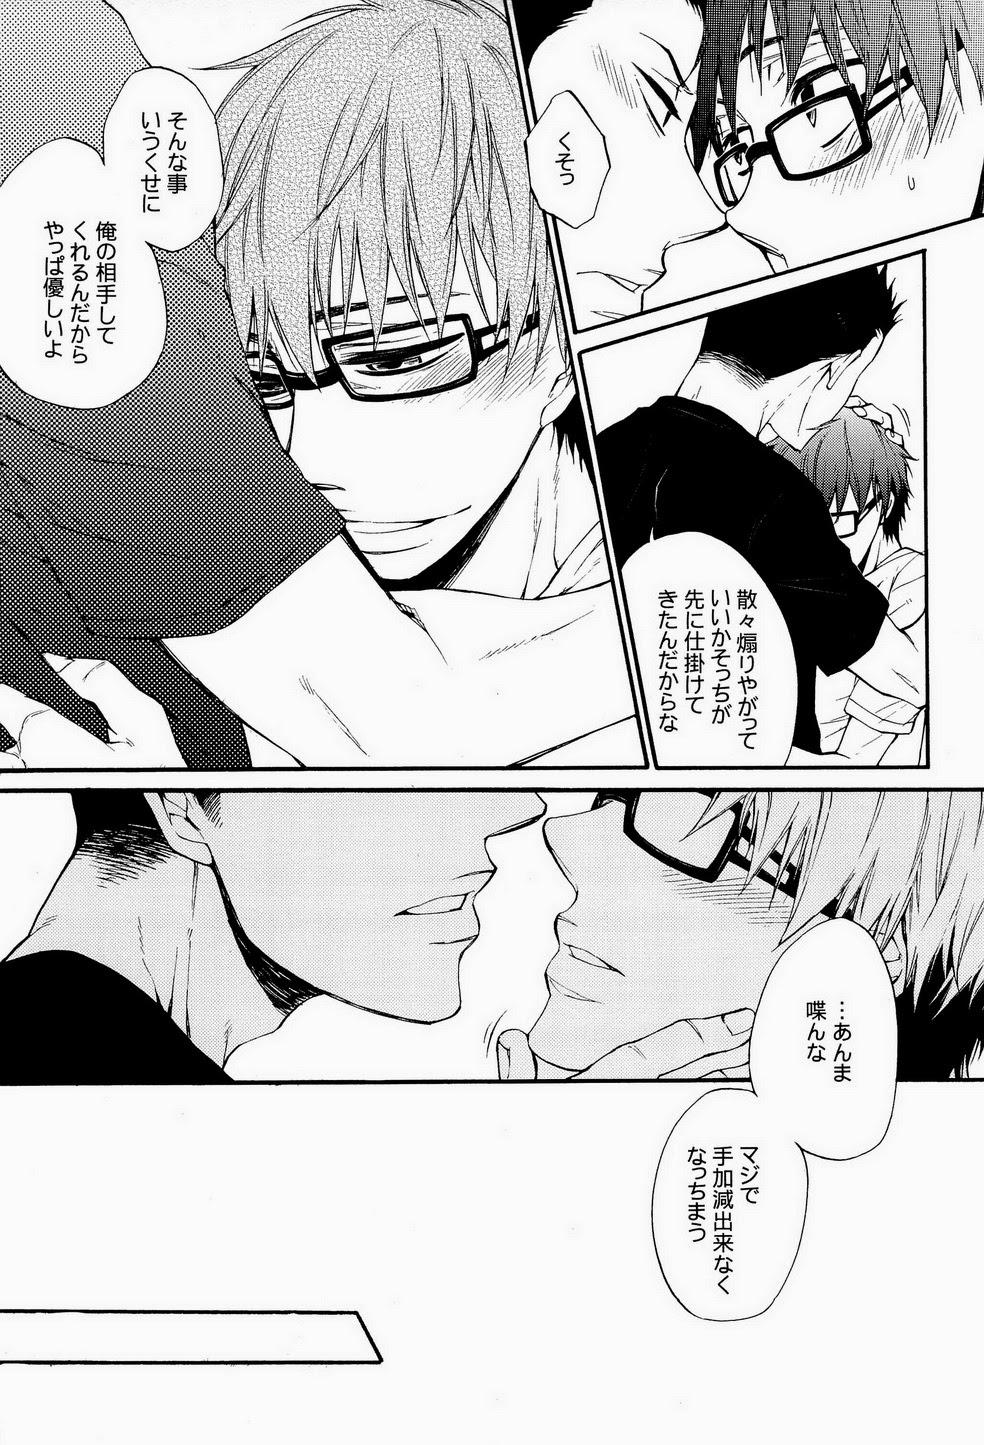 Tribute Re-recording book - Silver spoon Kink - Page 11